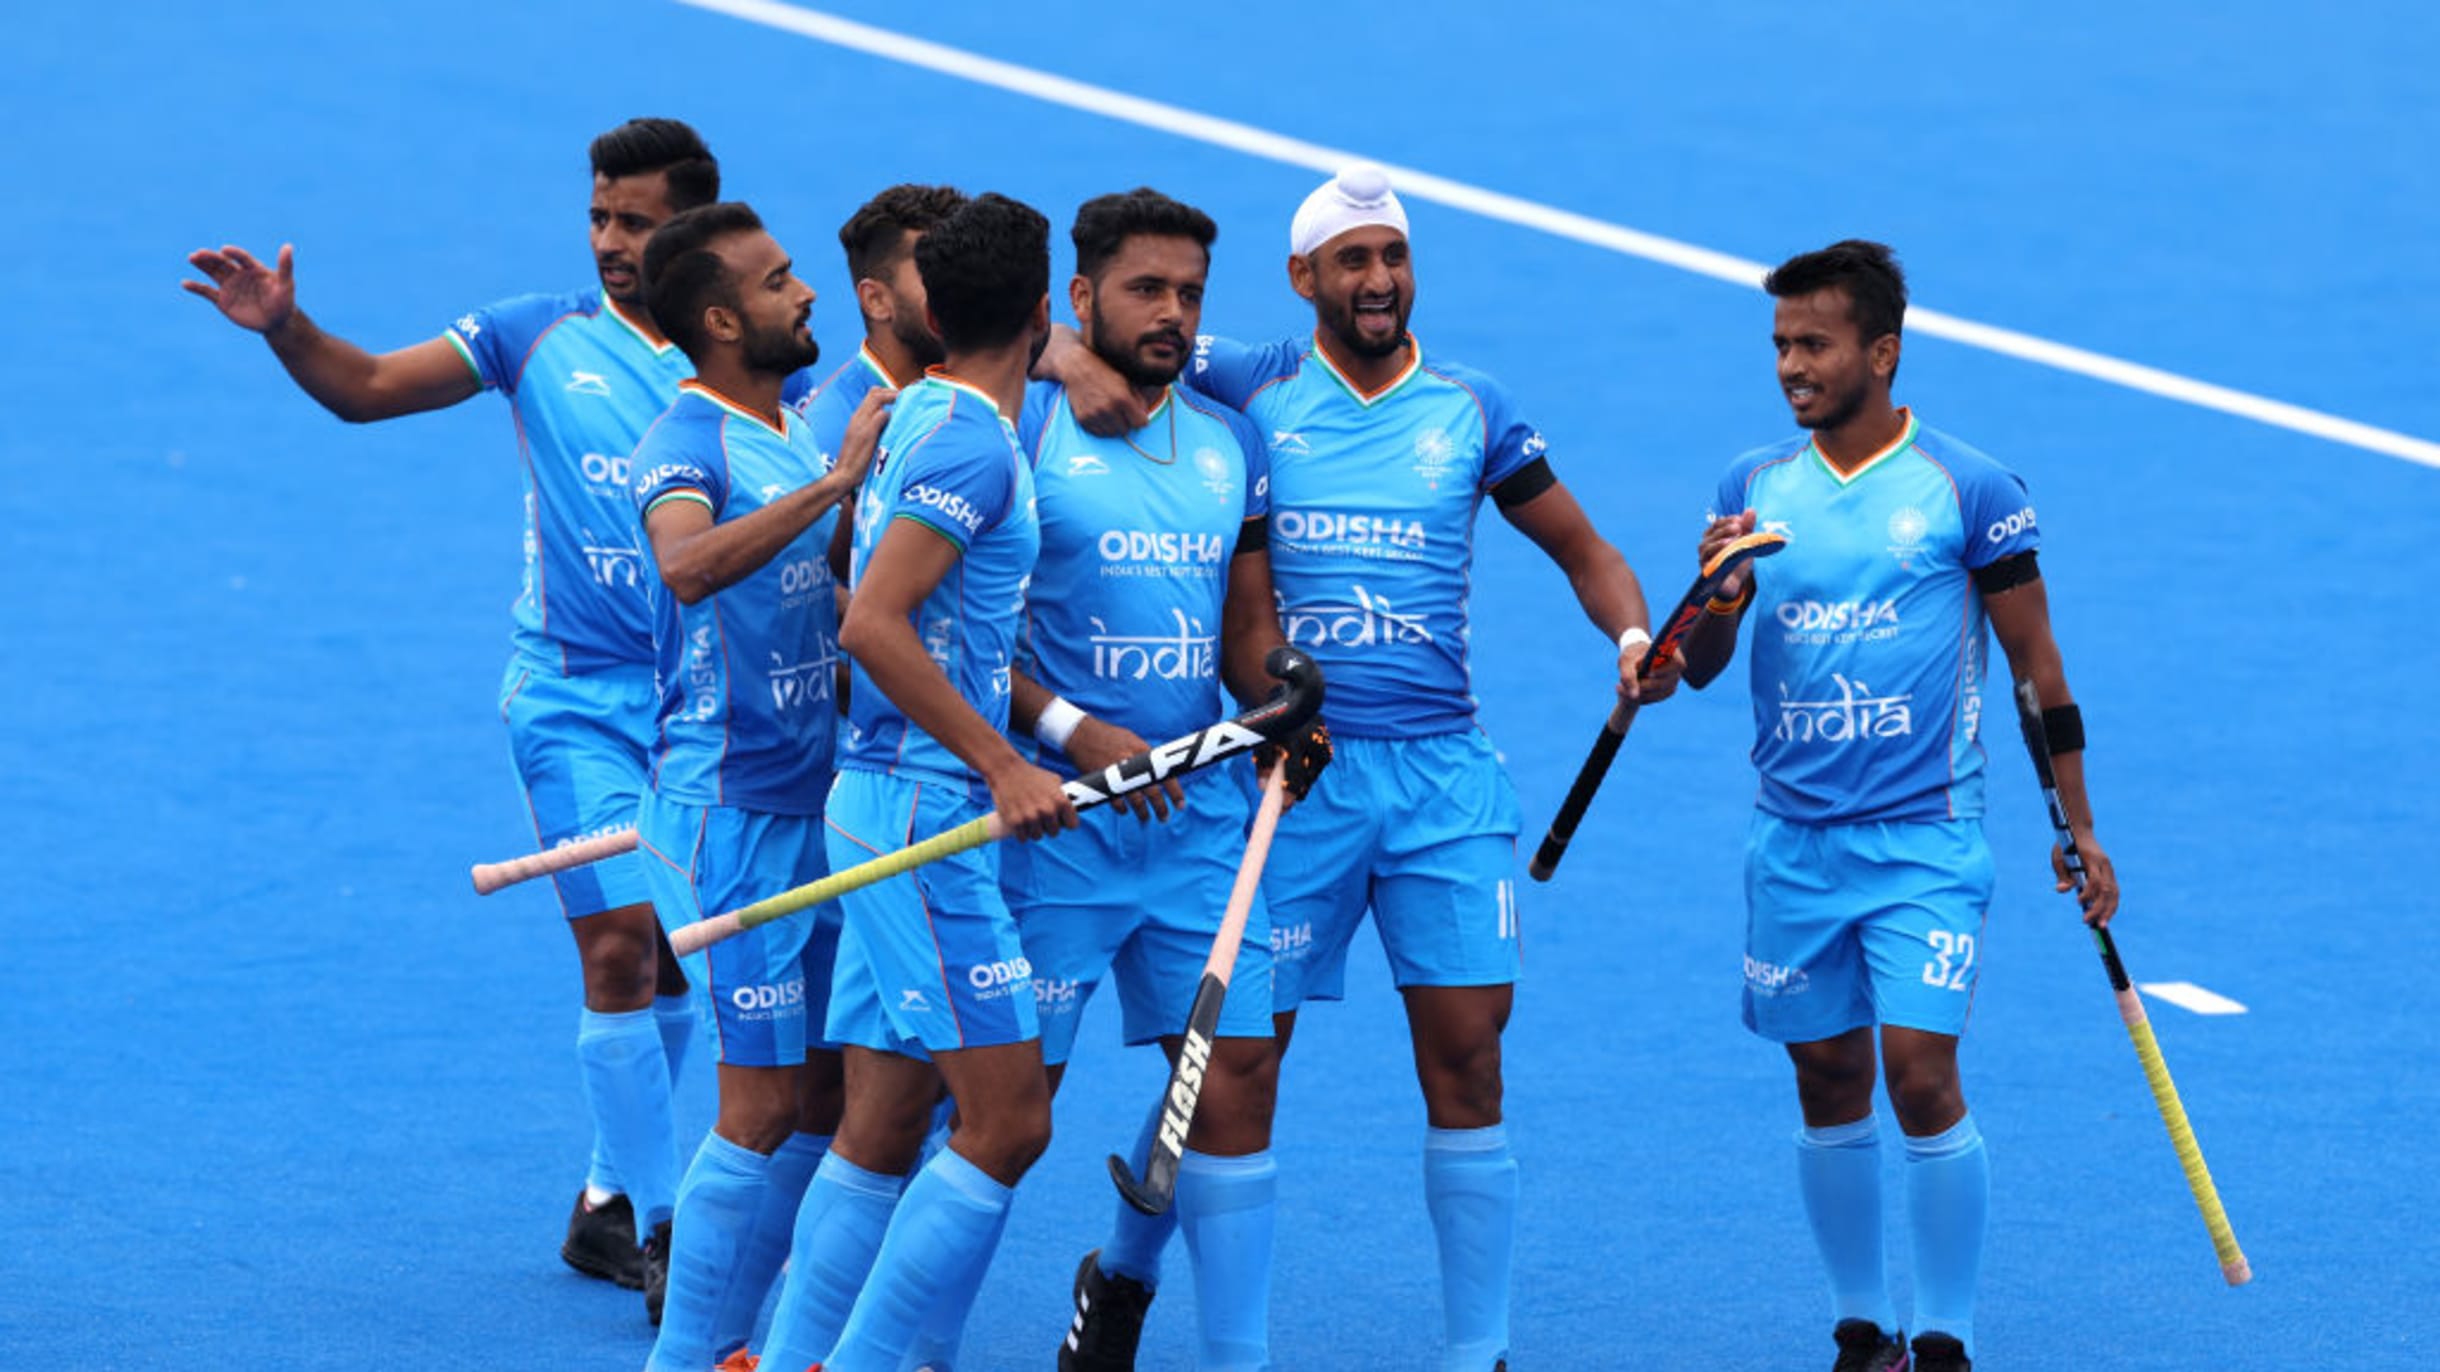 FIH Pro League 2022-23 Indian mens hockey team finishes fourth